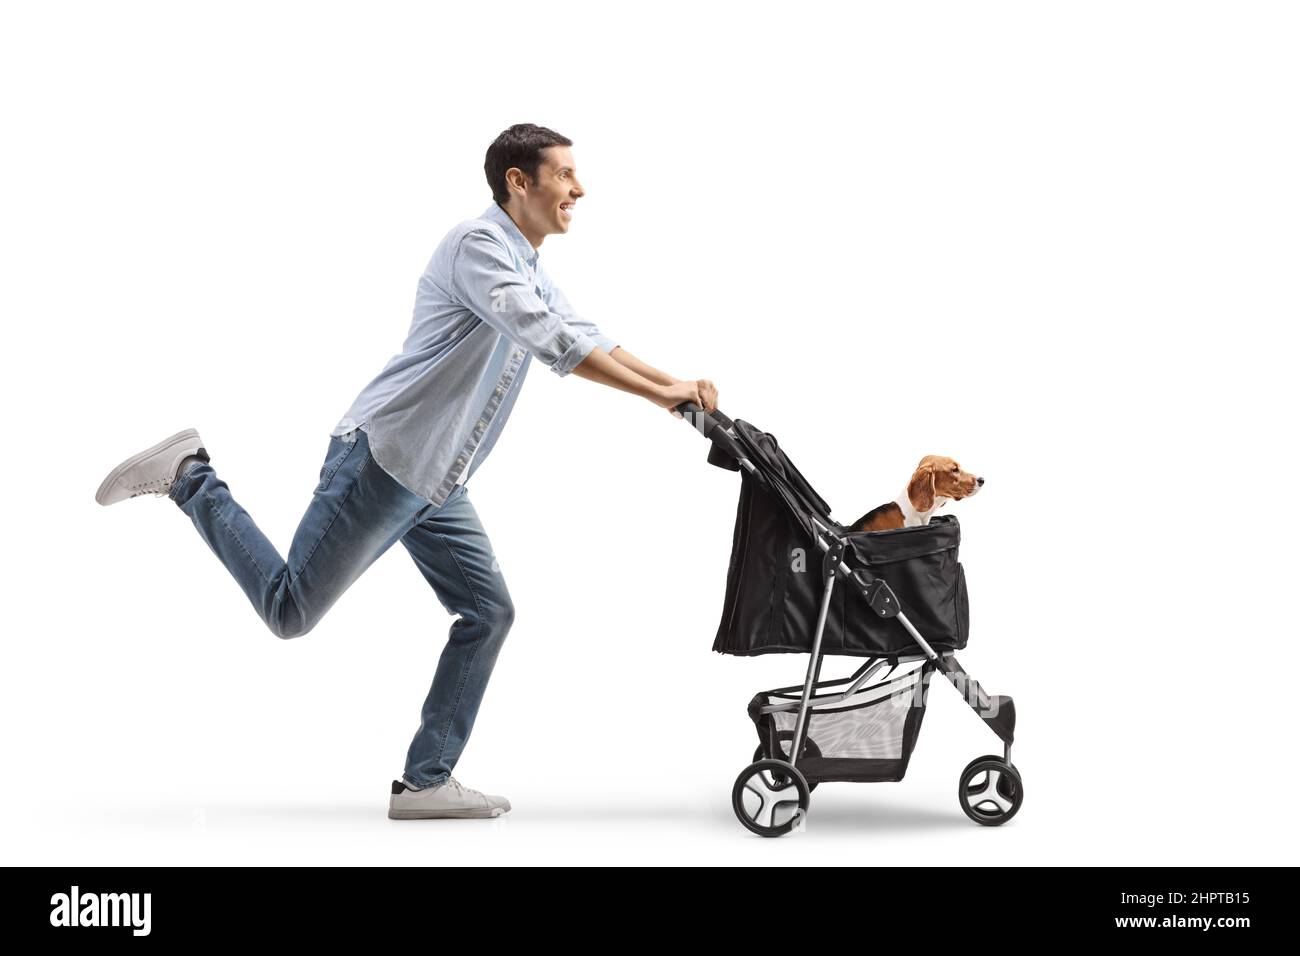 Full length profile shot of a casual young man pushing a dog stroller and running isolated on white background Stock Photo